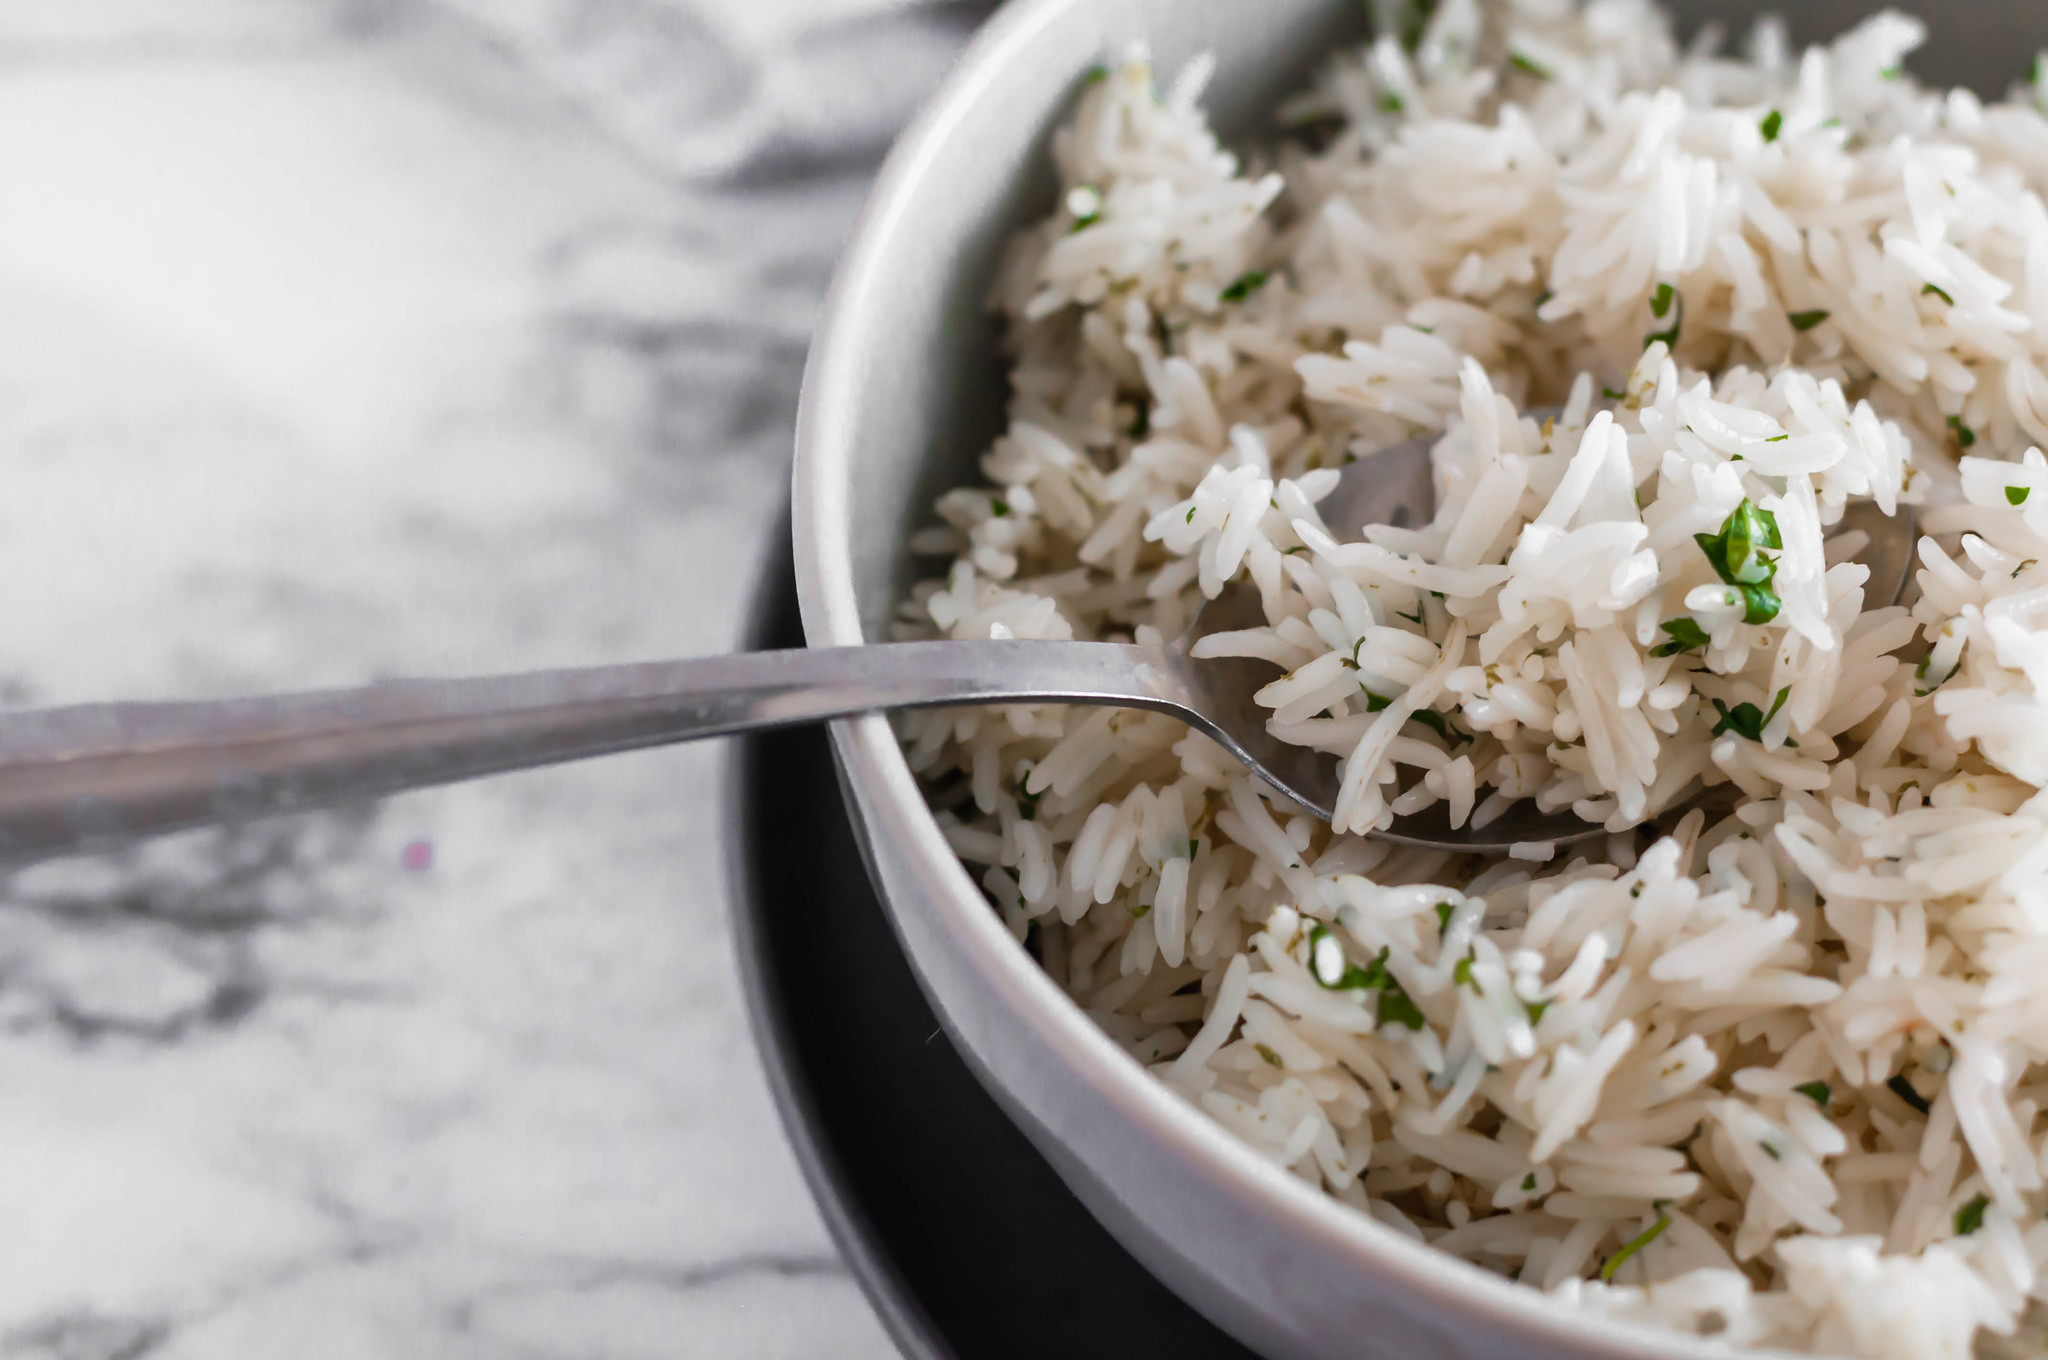 Instant Pot Cilantro Lime Rice couldn't get easier with 3 ingredients and a 4 minute cook time. Super flavorful and perfect with any Mexican meal.